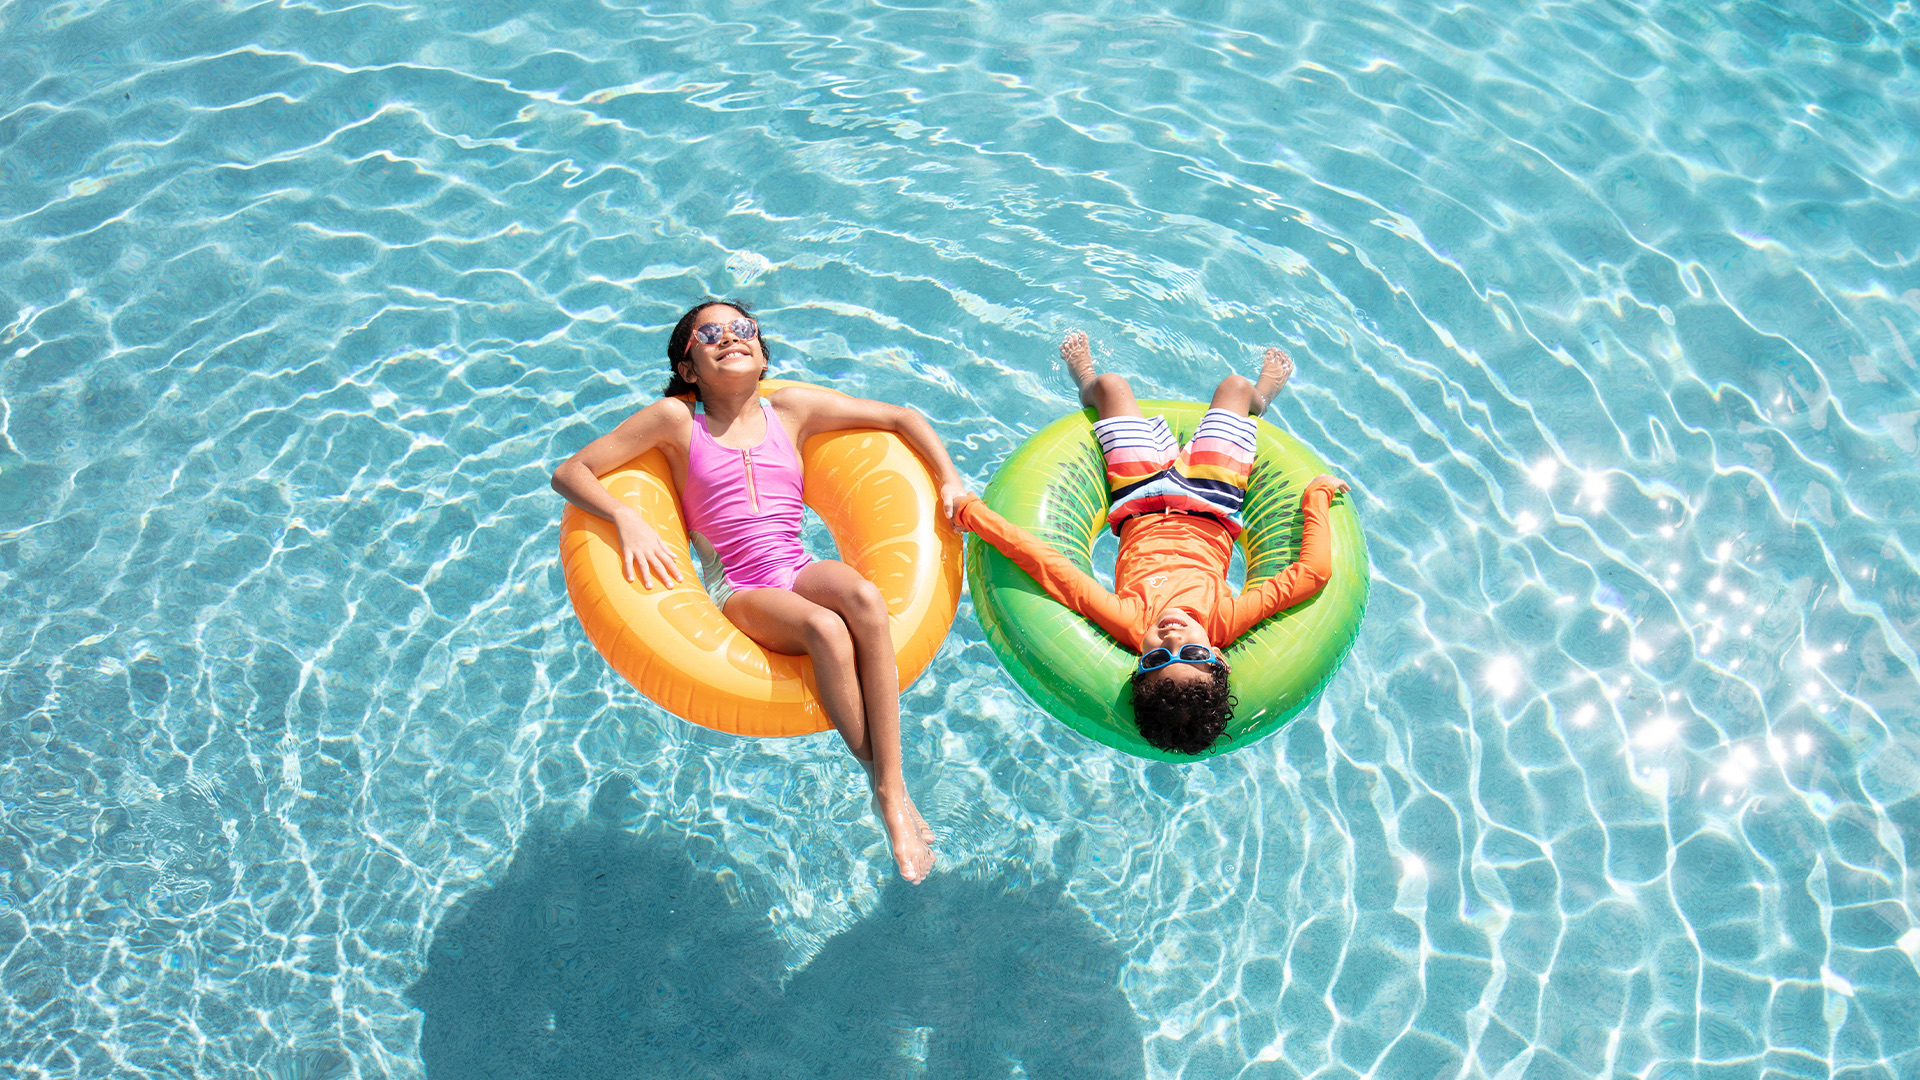 Two children lounging on pool floats 